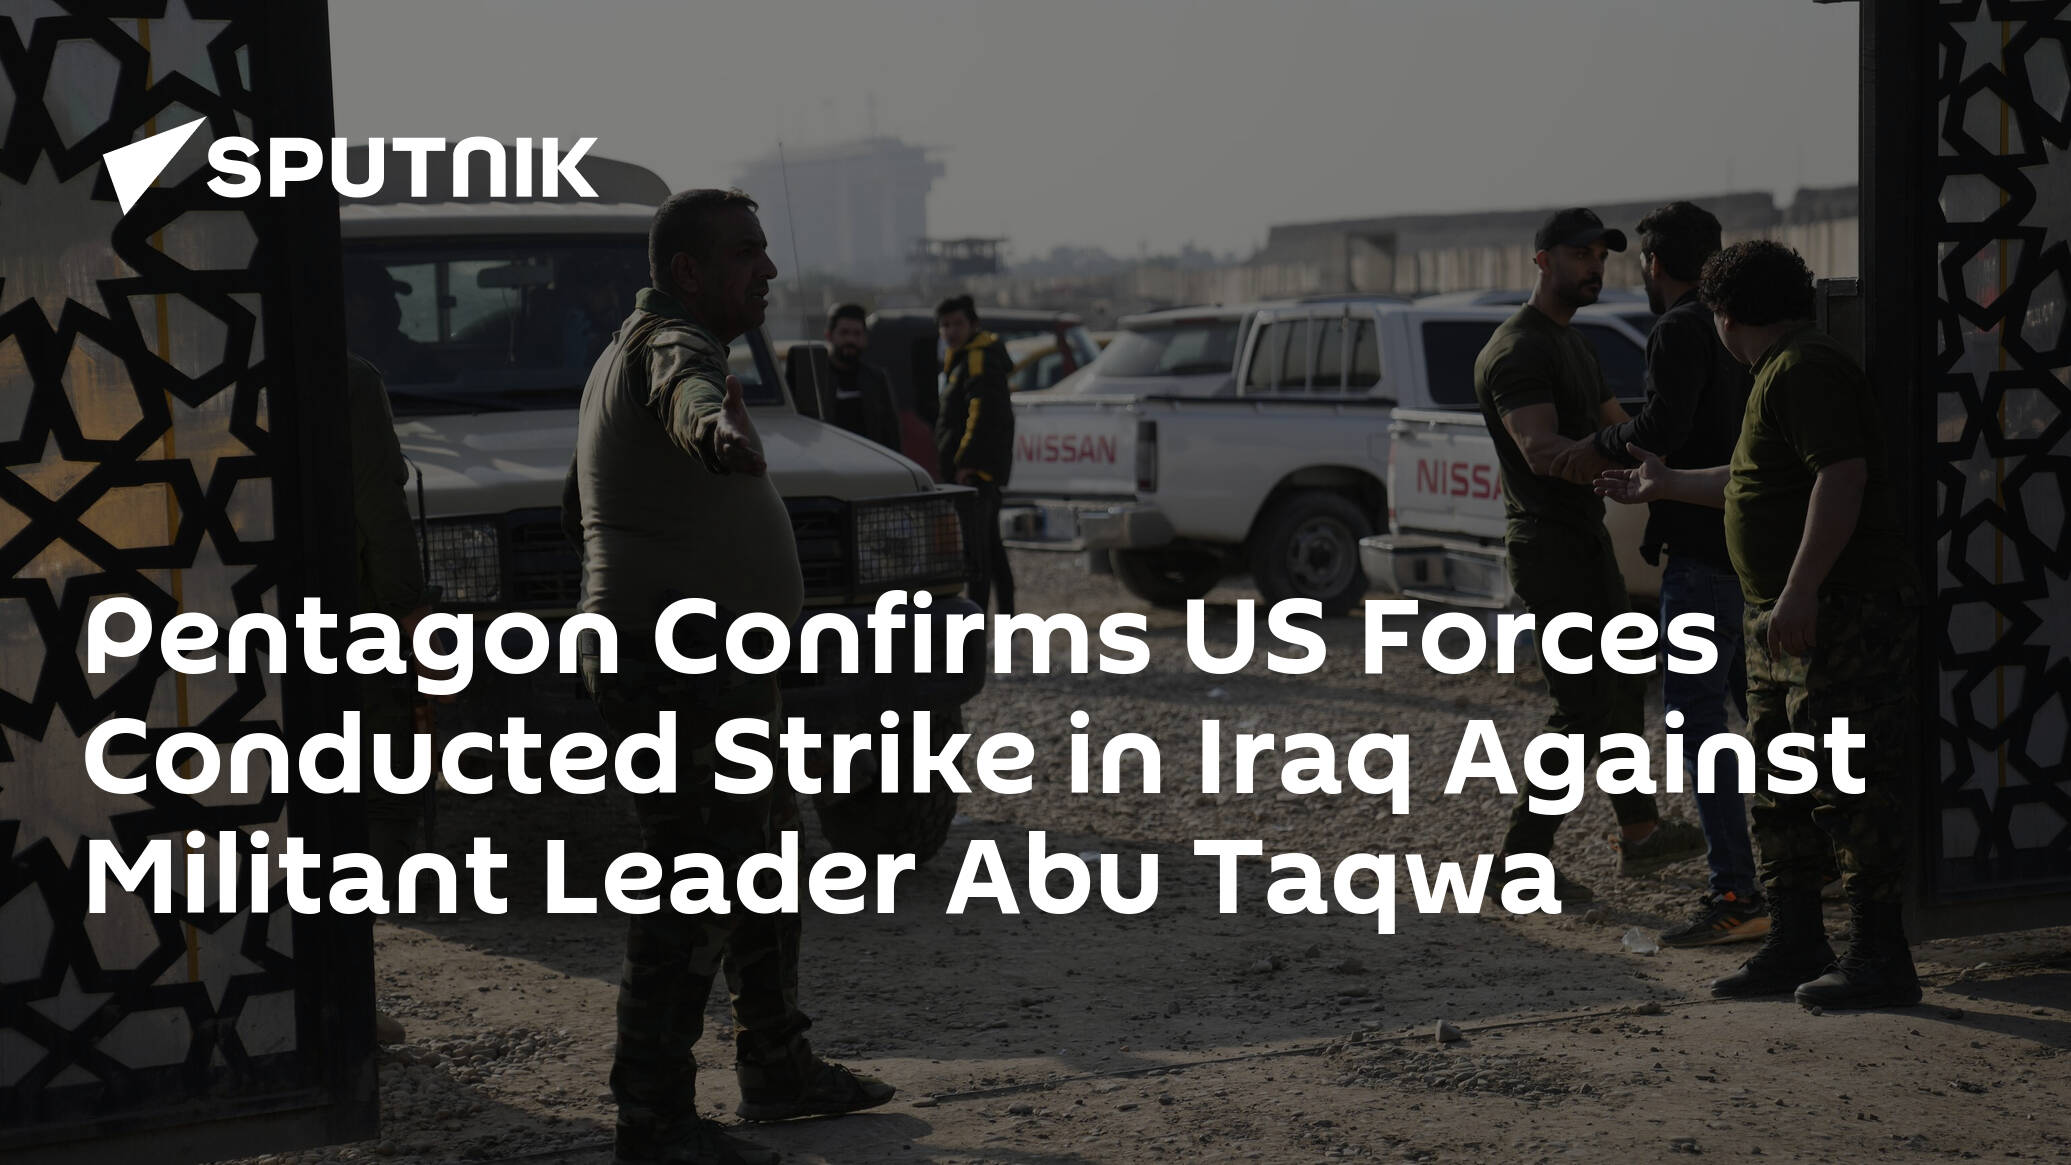 Pentagon Confirms US Forces Conducted Strike in Iraq Against Militant Leader Abu Taqwa